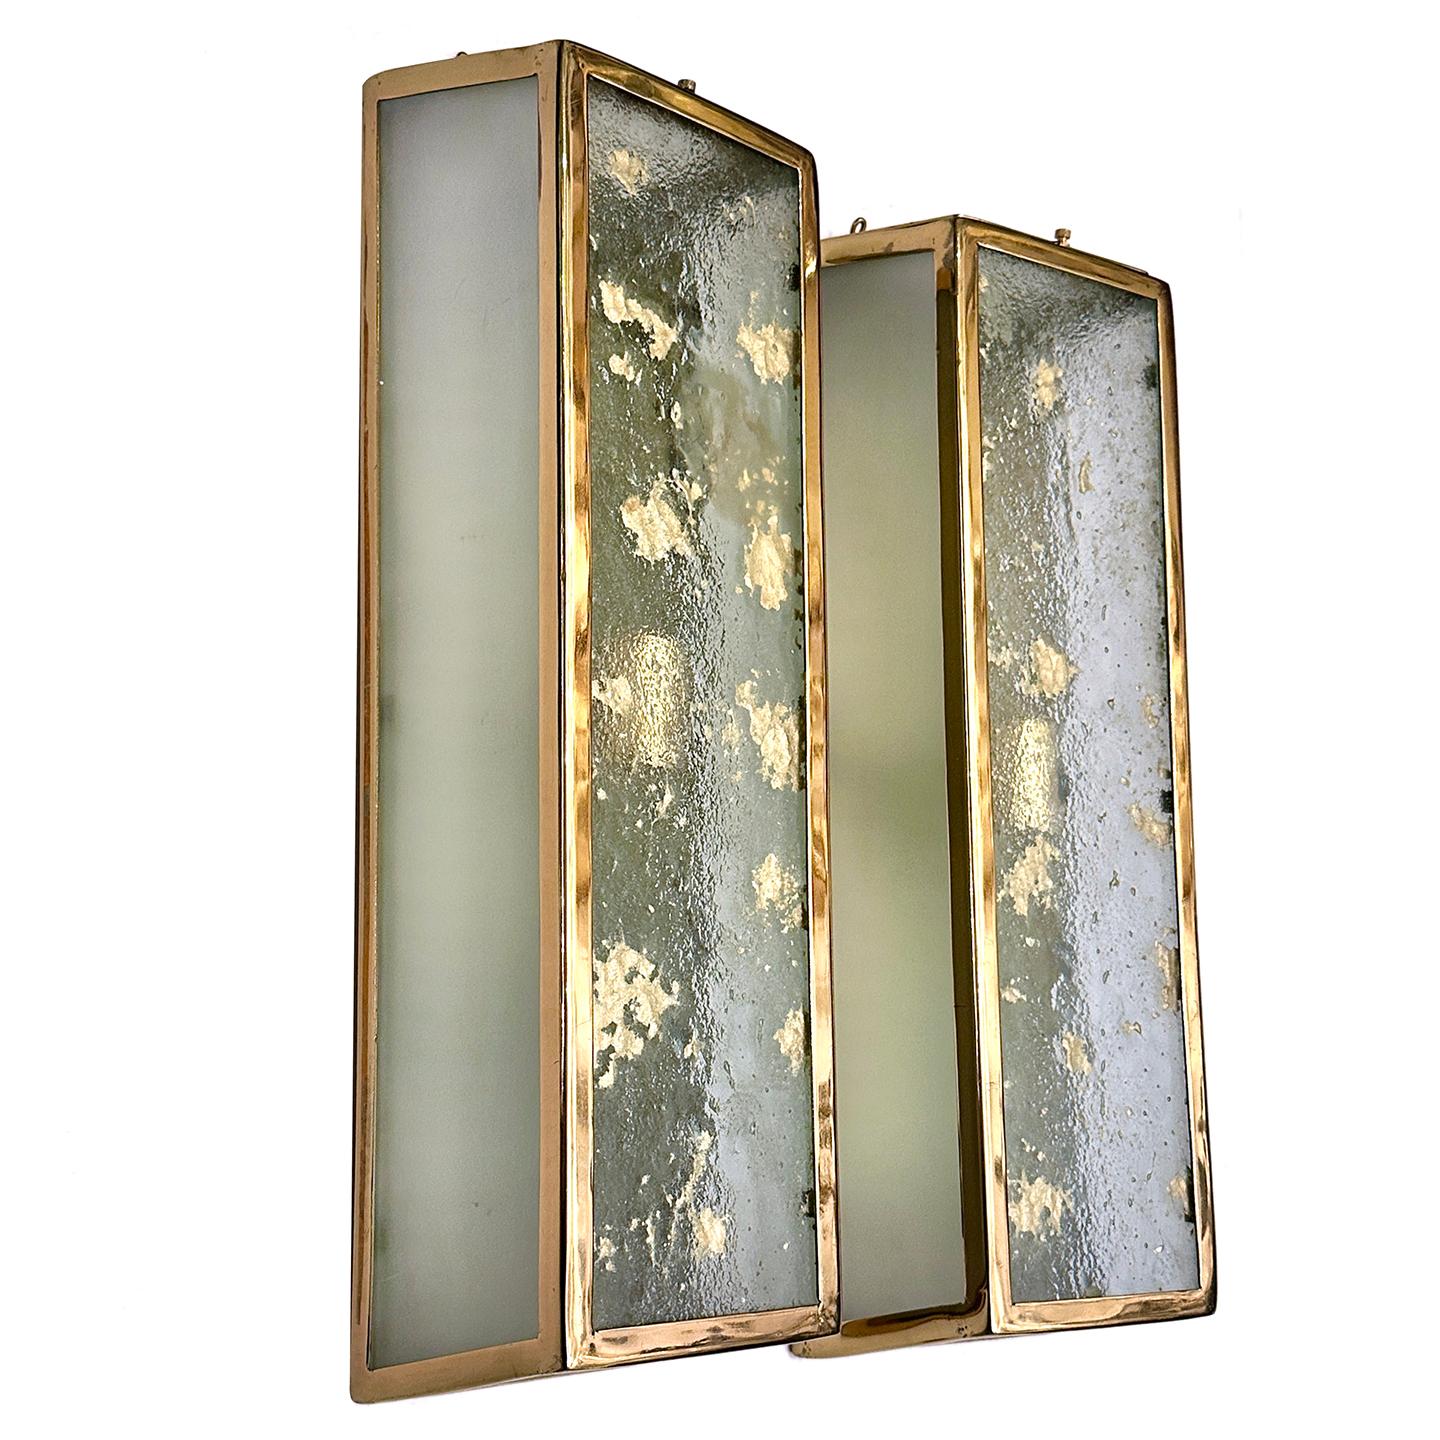 Pair of circa 1950's French gilt bronze sconces with art glass insets. 2 lights each.

Measurements:
Height: 21.5